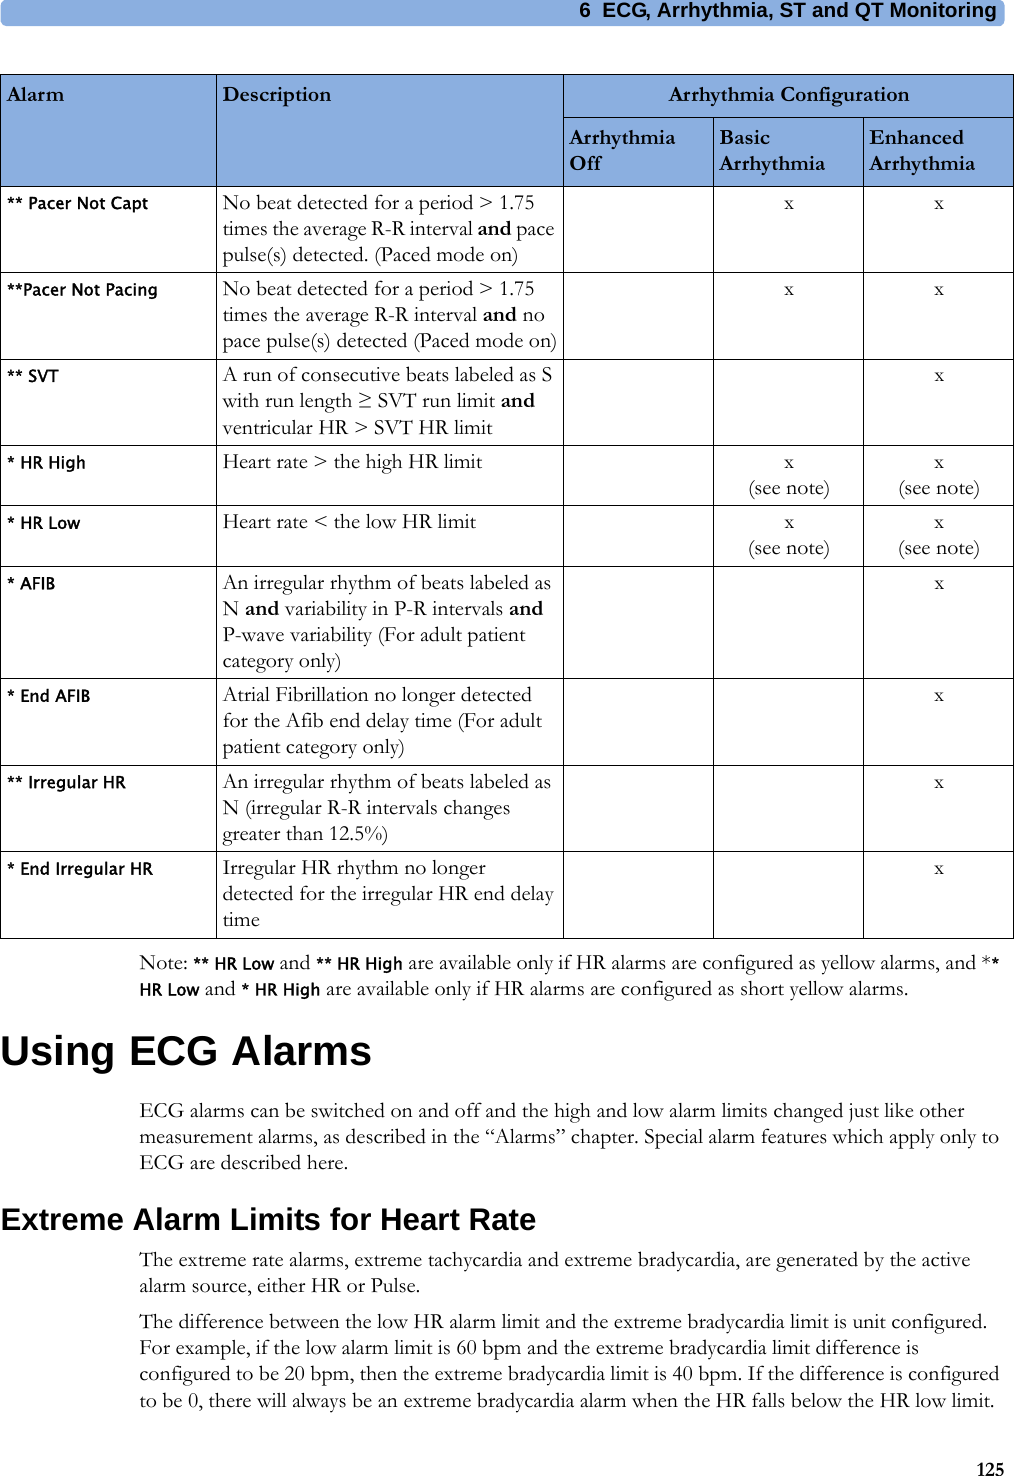 6 ECG, Arrhythmia, ST and QT Monitoring125Note: ** HR Low and ** HR High are available only if HR alarms are configured as yellow alarms, and ** HR Low and * HR High are available only if HR alarms are configured as short yellow alarms.Using ECG AlarmsECG alarms can be switched on and off and the high and low alarm limits changed just like other measurement alarms, as described in the “Alarms” chapter. Special alarm features which apply only to ECG are described here.Extreme Alarm Limits for Heart RateThe extreme rate alarms, extreme tachycardia and extreme bradycardia, are generated by the active alarm source, either HR or Pulse.The difference between the low HR alarm limit and the extreme bradycardia limit is unit configured. For example, if the low alarm limit is 60 bpm and the extreme bradycardia limit difference is configured to be 20 bpm, then the extreme bradycardia limit is 40 bpm. If the difference is configured to be 0, there will always be an extreme bradycardia alarm when the HR falls below the HR low limit.** Pacer Not Capt No beat detected for a period &gt; 1.75 times the average R-R interval and pace pulse(s) detected. (Paced mode on)xx**Pacer Not Pacing No beat detected for a period &gt; 1.75 times the average R-R interval and no pace pulse(s) detected (Paced mode on)xx** SVT A run of consecutive beats labeled as S with run length ≥ SVT run limit and ventricular HR &gt; SVT HR limitx* HR High Heart rate &gt; the high HR limit x(see note)x(see note)* HR Low Heart rate &lt; the low HR limit x(see note)x(see note)* AFIB An irregular rhythm of beats labeled as N and variability in P-R intervals and P-wave variability (For adult patient category only)x* End AFIB Atrial Fibrillation no longer detected for the Afib end delay time (For adult patient category only)x** Irregular HR An irregular rhythm of beats labeled as N (irregular R-R intervals changes greater than 12.5%)x* End Irregular HR Irregular HR rhythm no longer detected for the irregular HR end delay timexAlarm Description Arrhythmia ConfigurationArrhythmia OffBasic ArrhythmiaEnhanced Arrhythmia